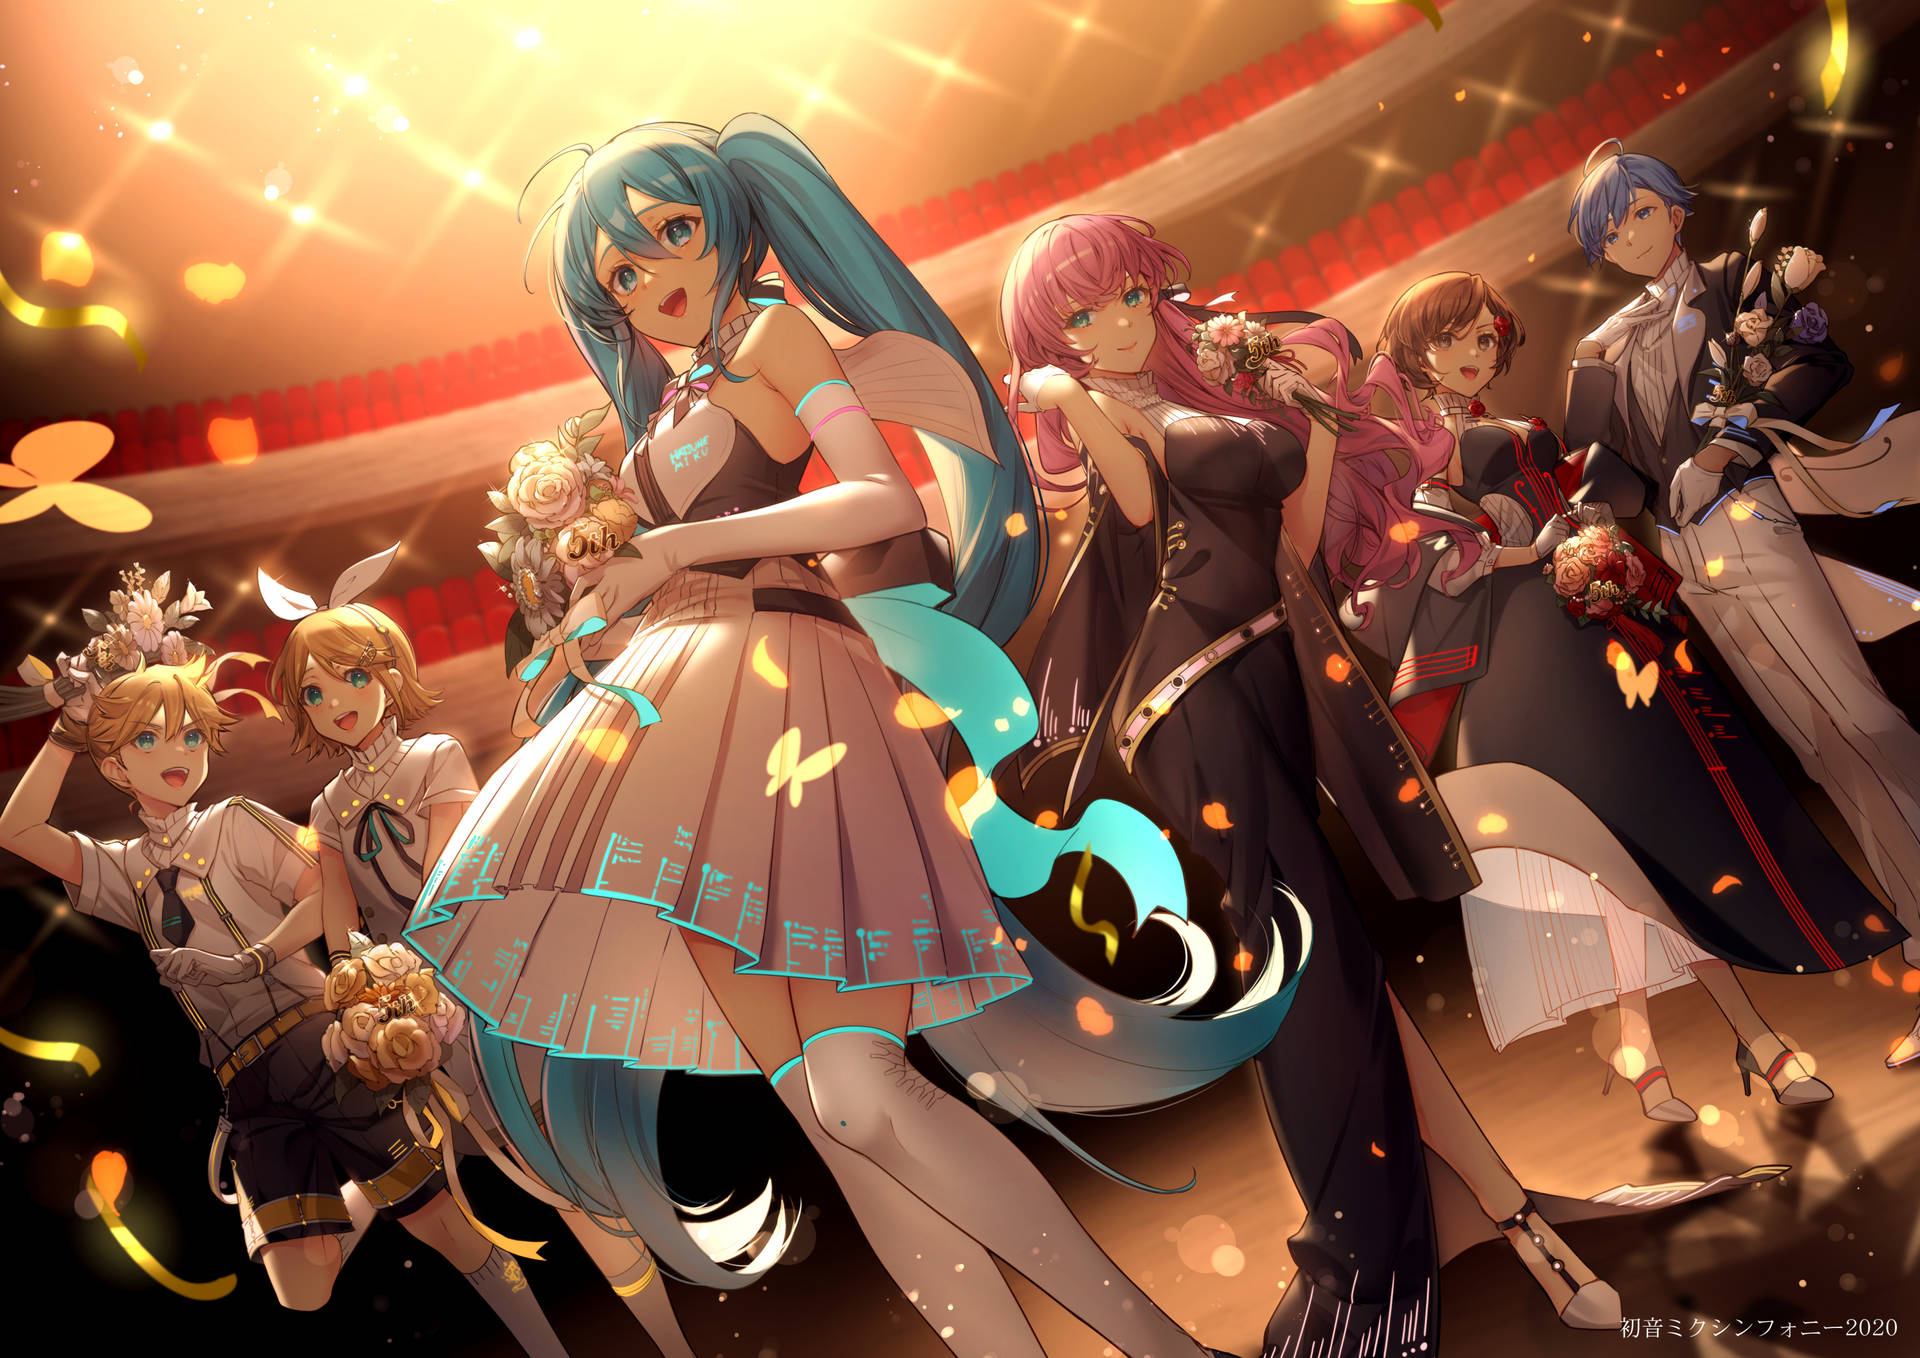 Enjoying The Music With Vocaloid